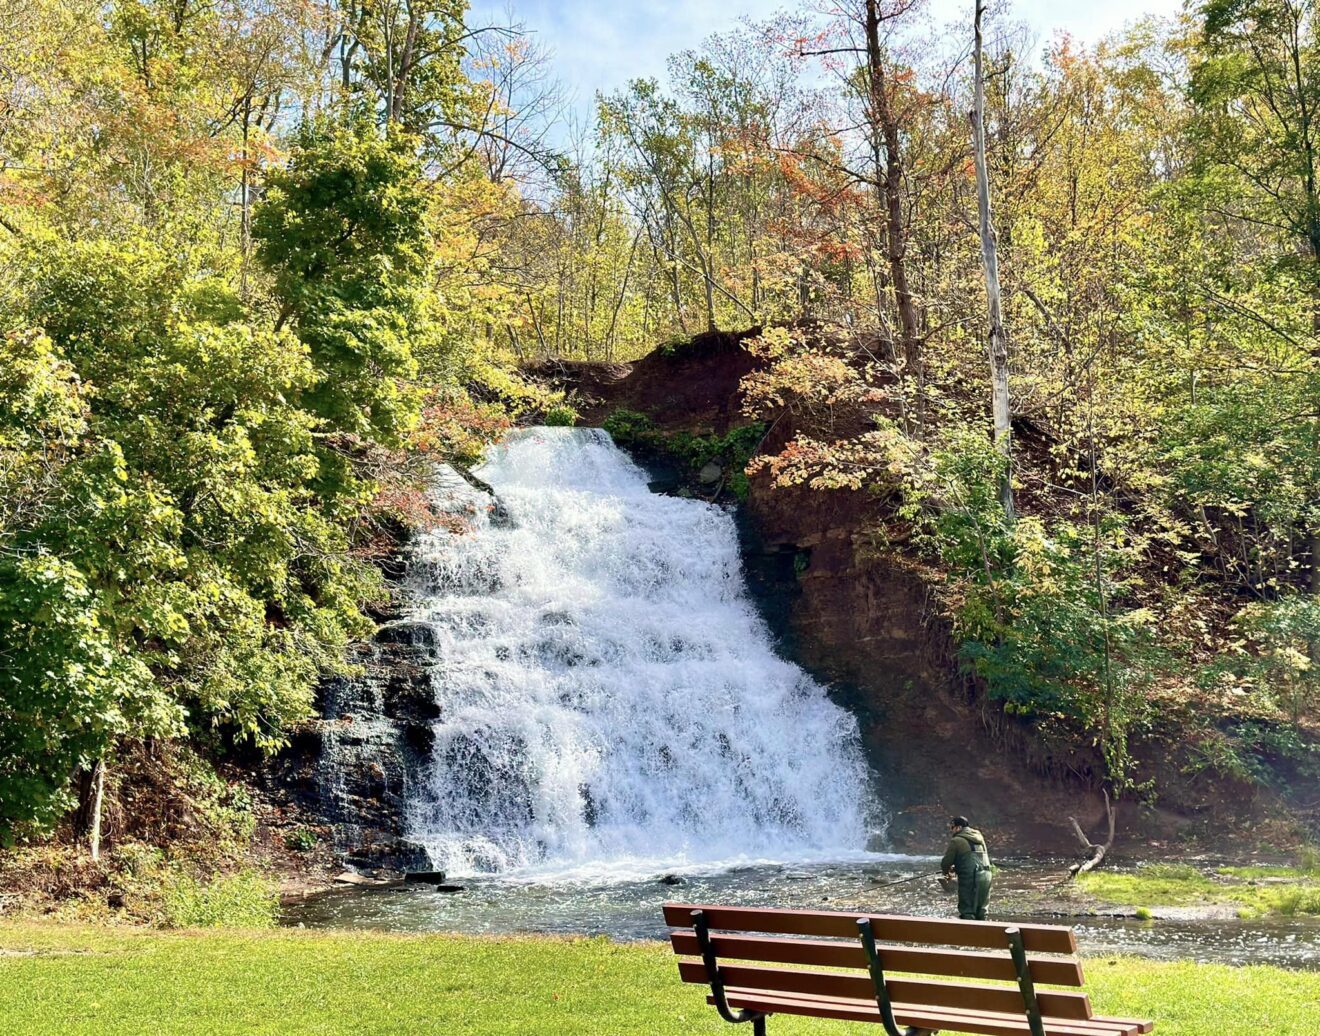 Holley canal falls